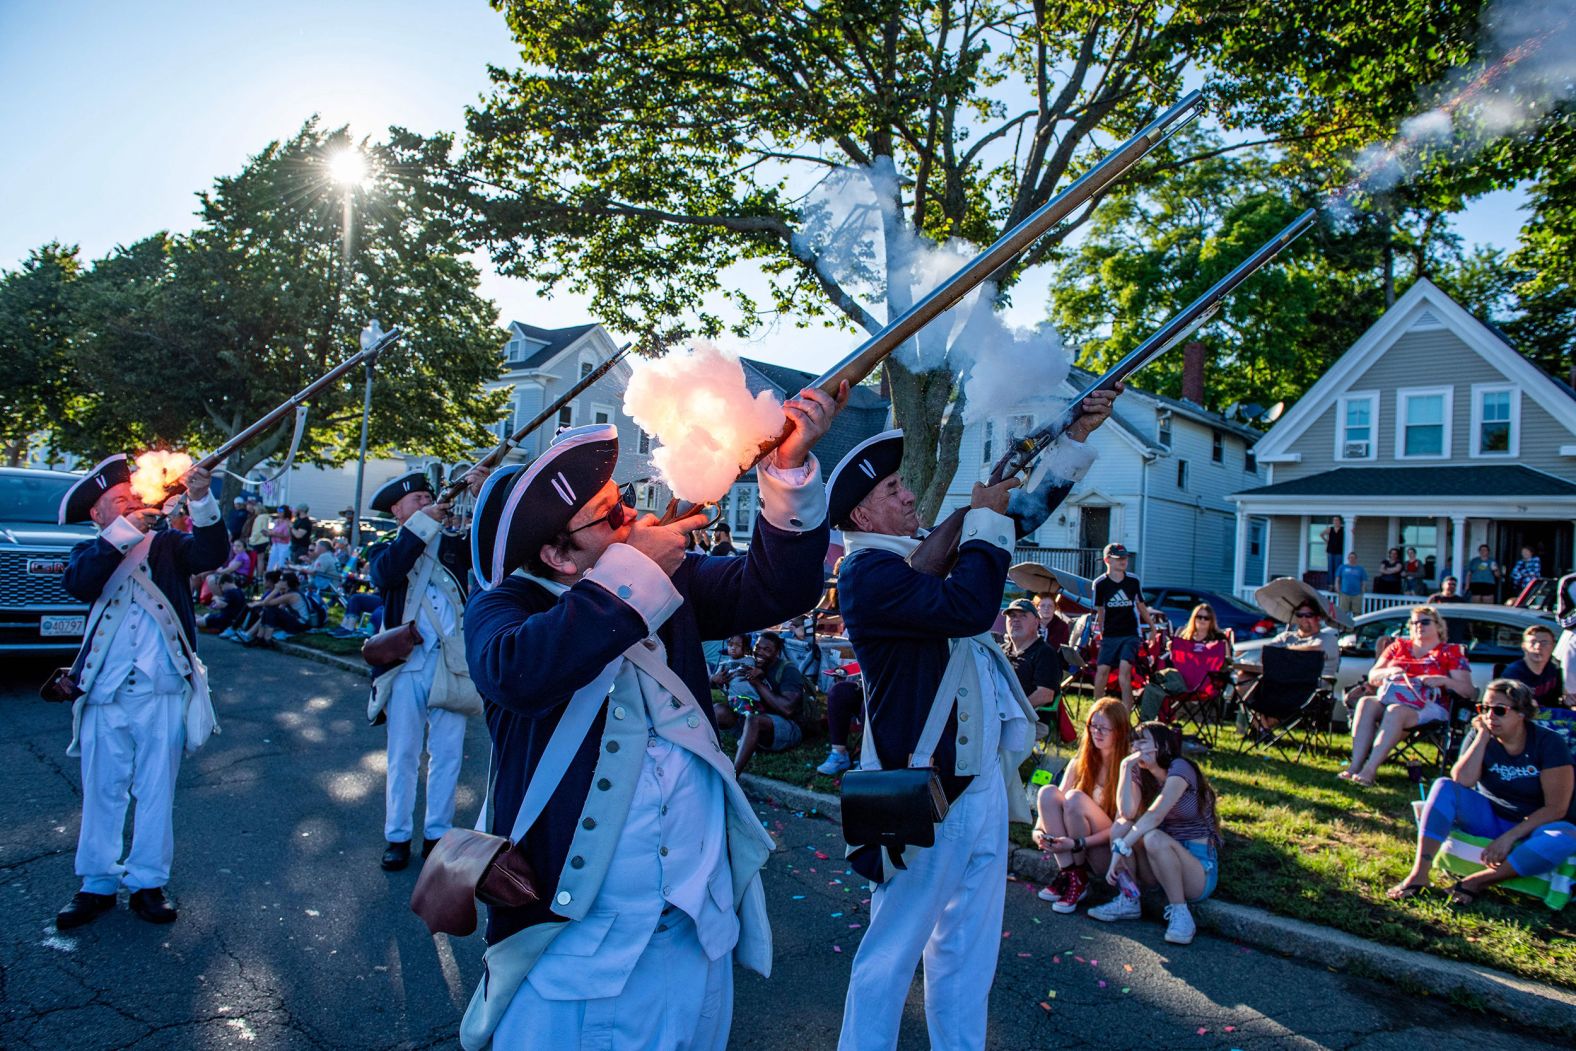 Colonial re-enactors fire their weapons during a parade in Gloucester, Massachusetts, on Monday, July 3.